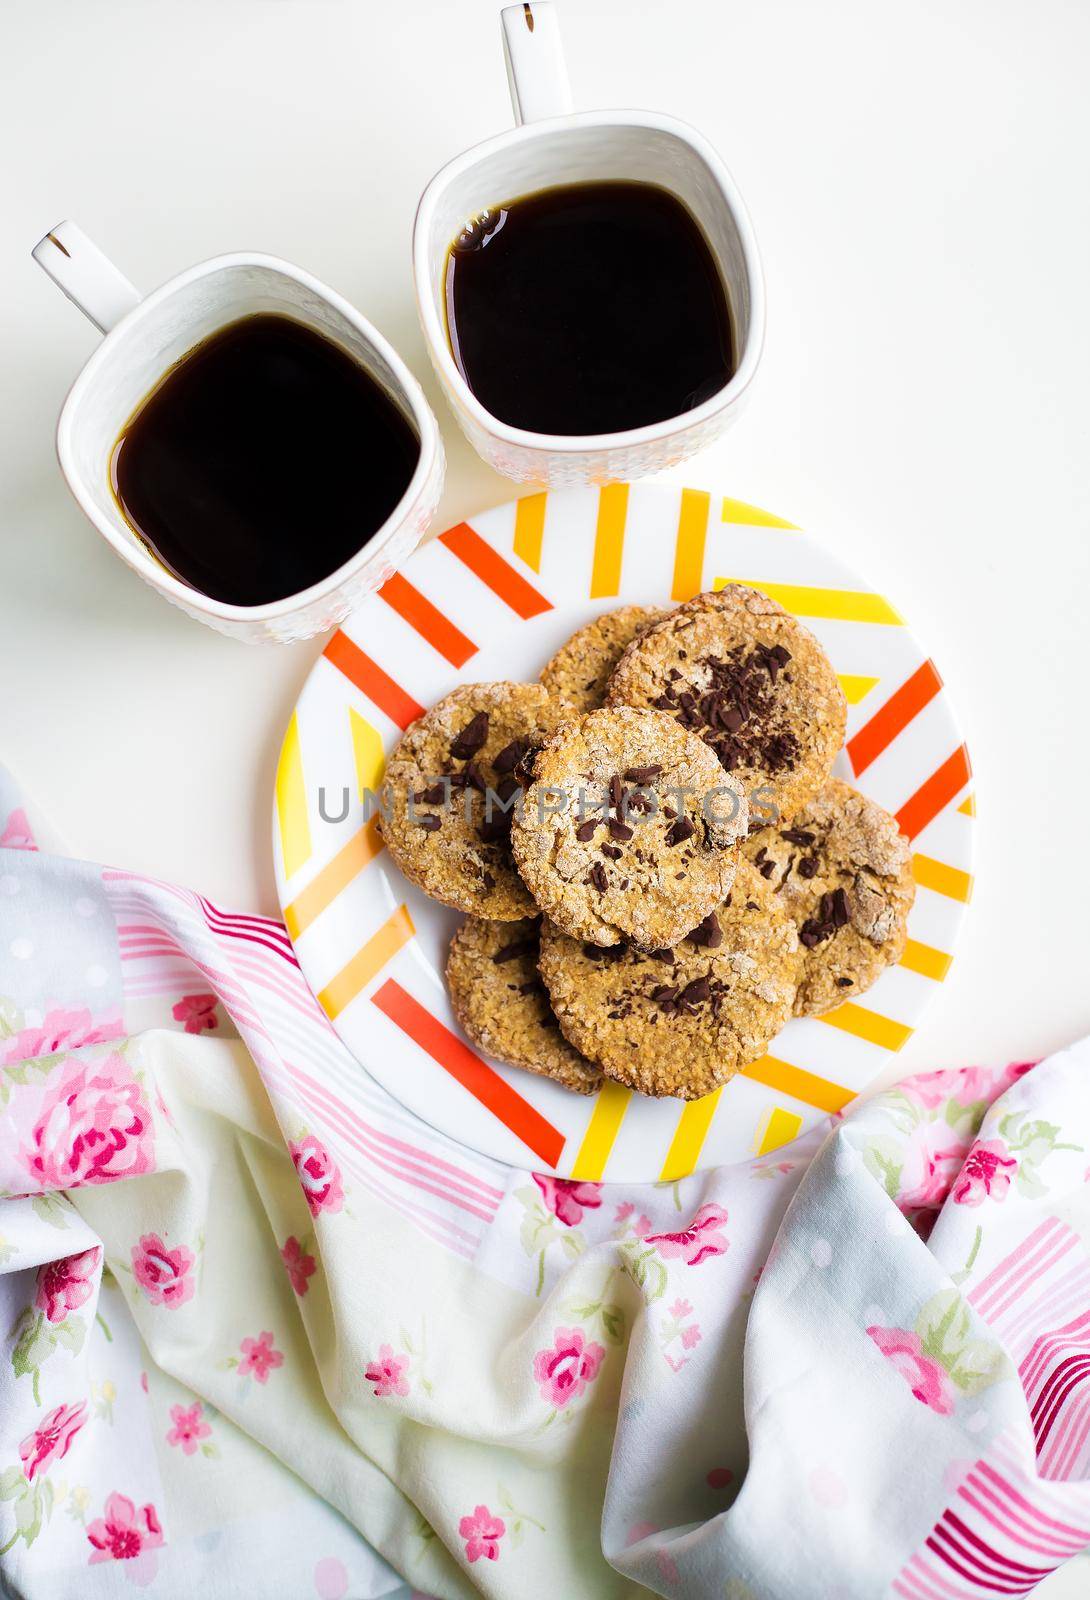 Oatmeal cookies with chocolate on a plate with bright cloth and two cups of coffee